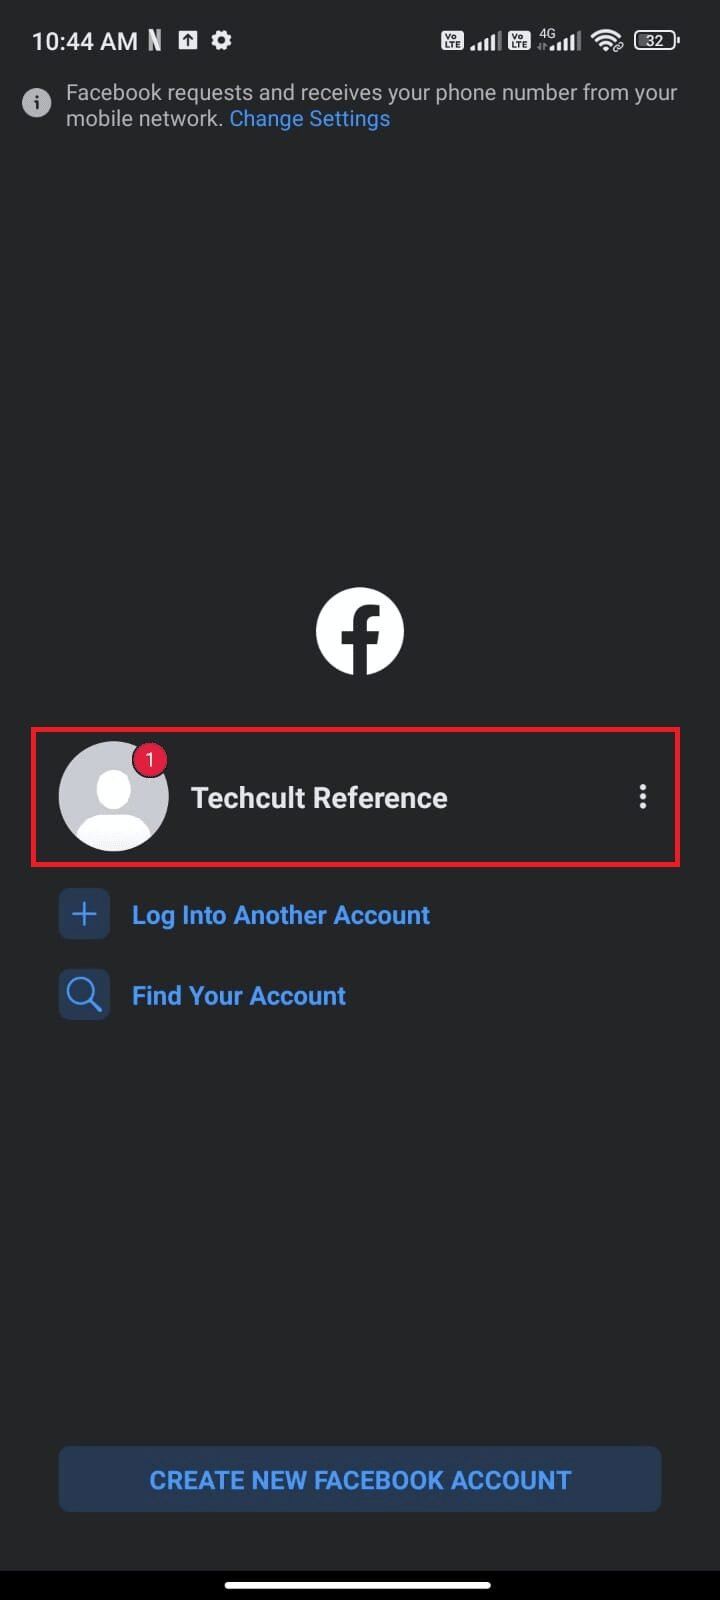 tap on your Facebook account to log in again